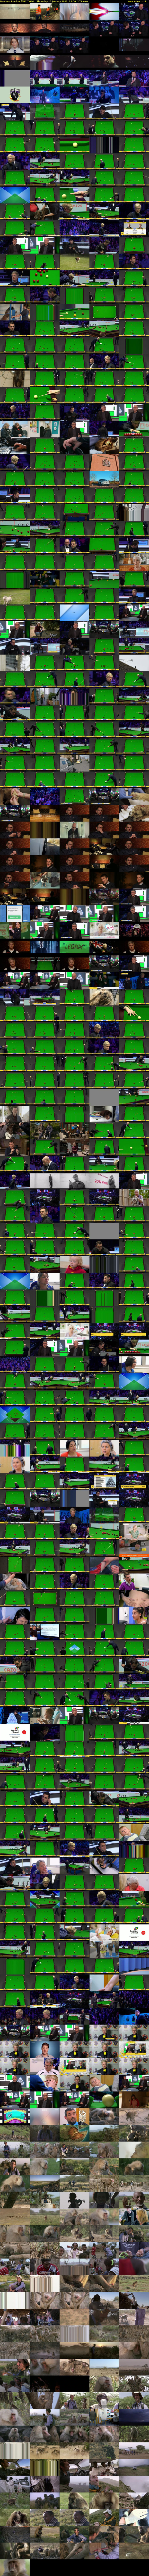 Masters Snooker (BBC TWO) Thursday 13 January 2022 13:00 - 17:15